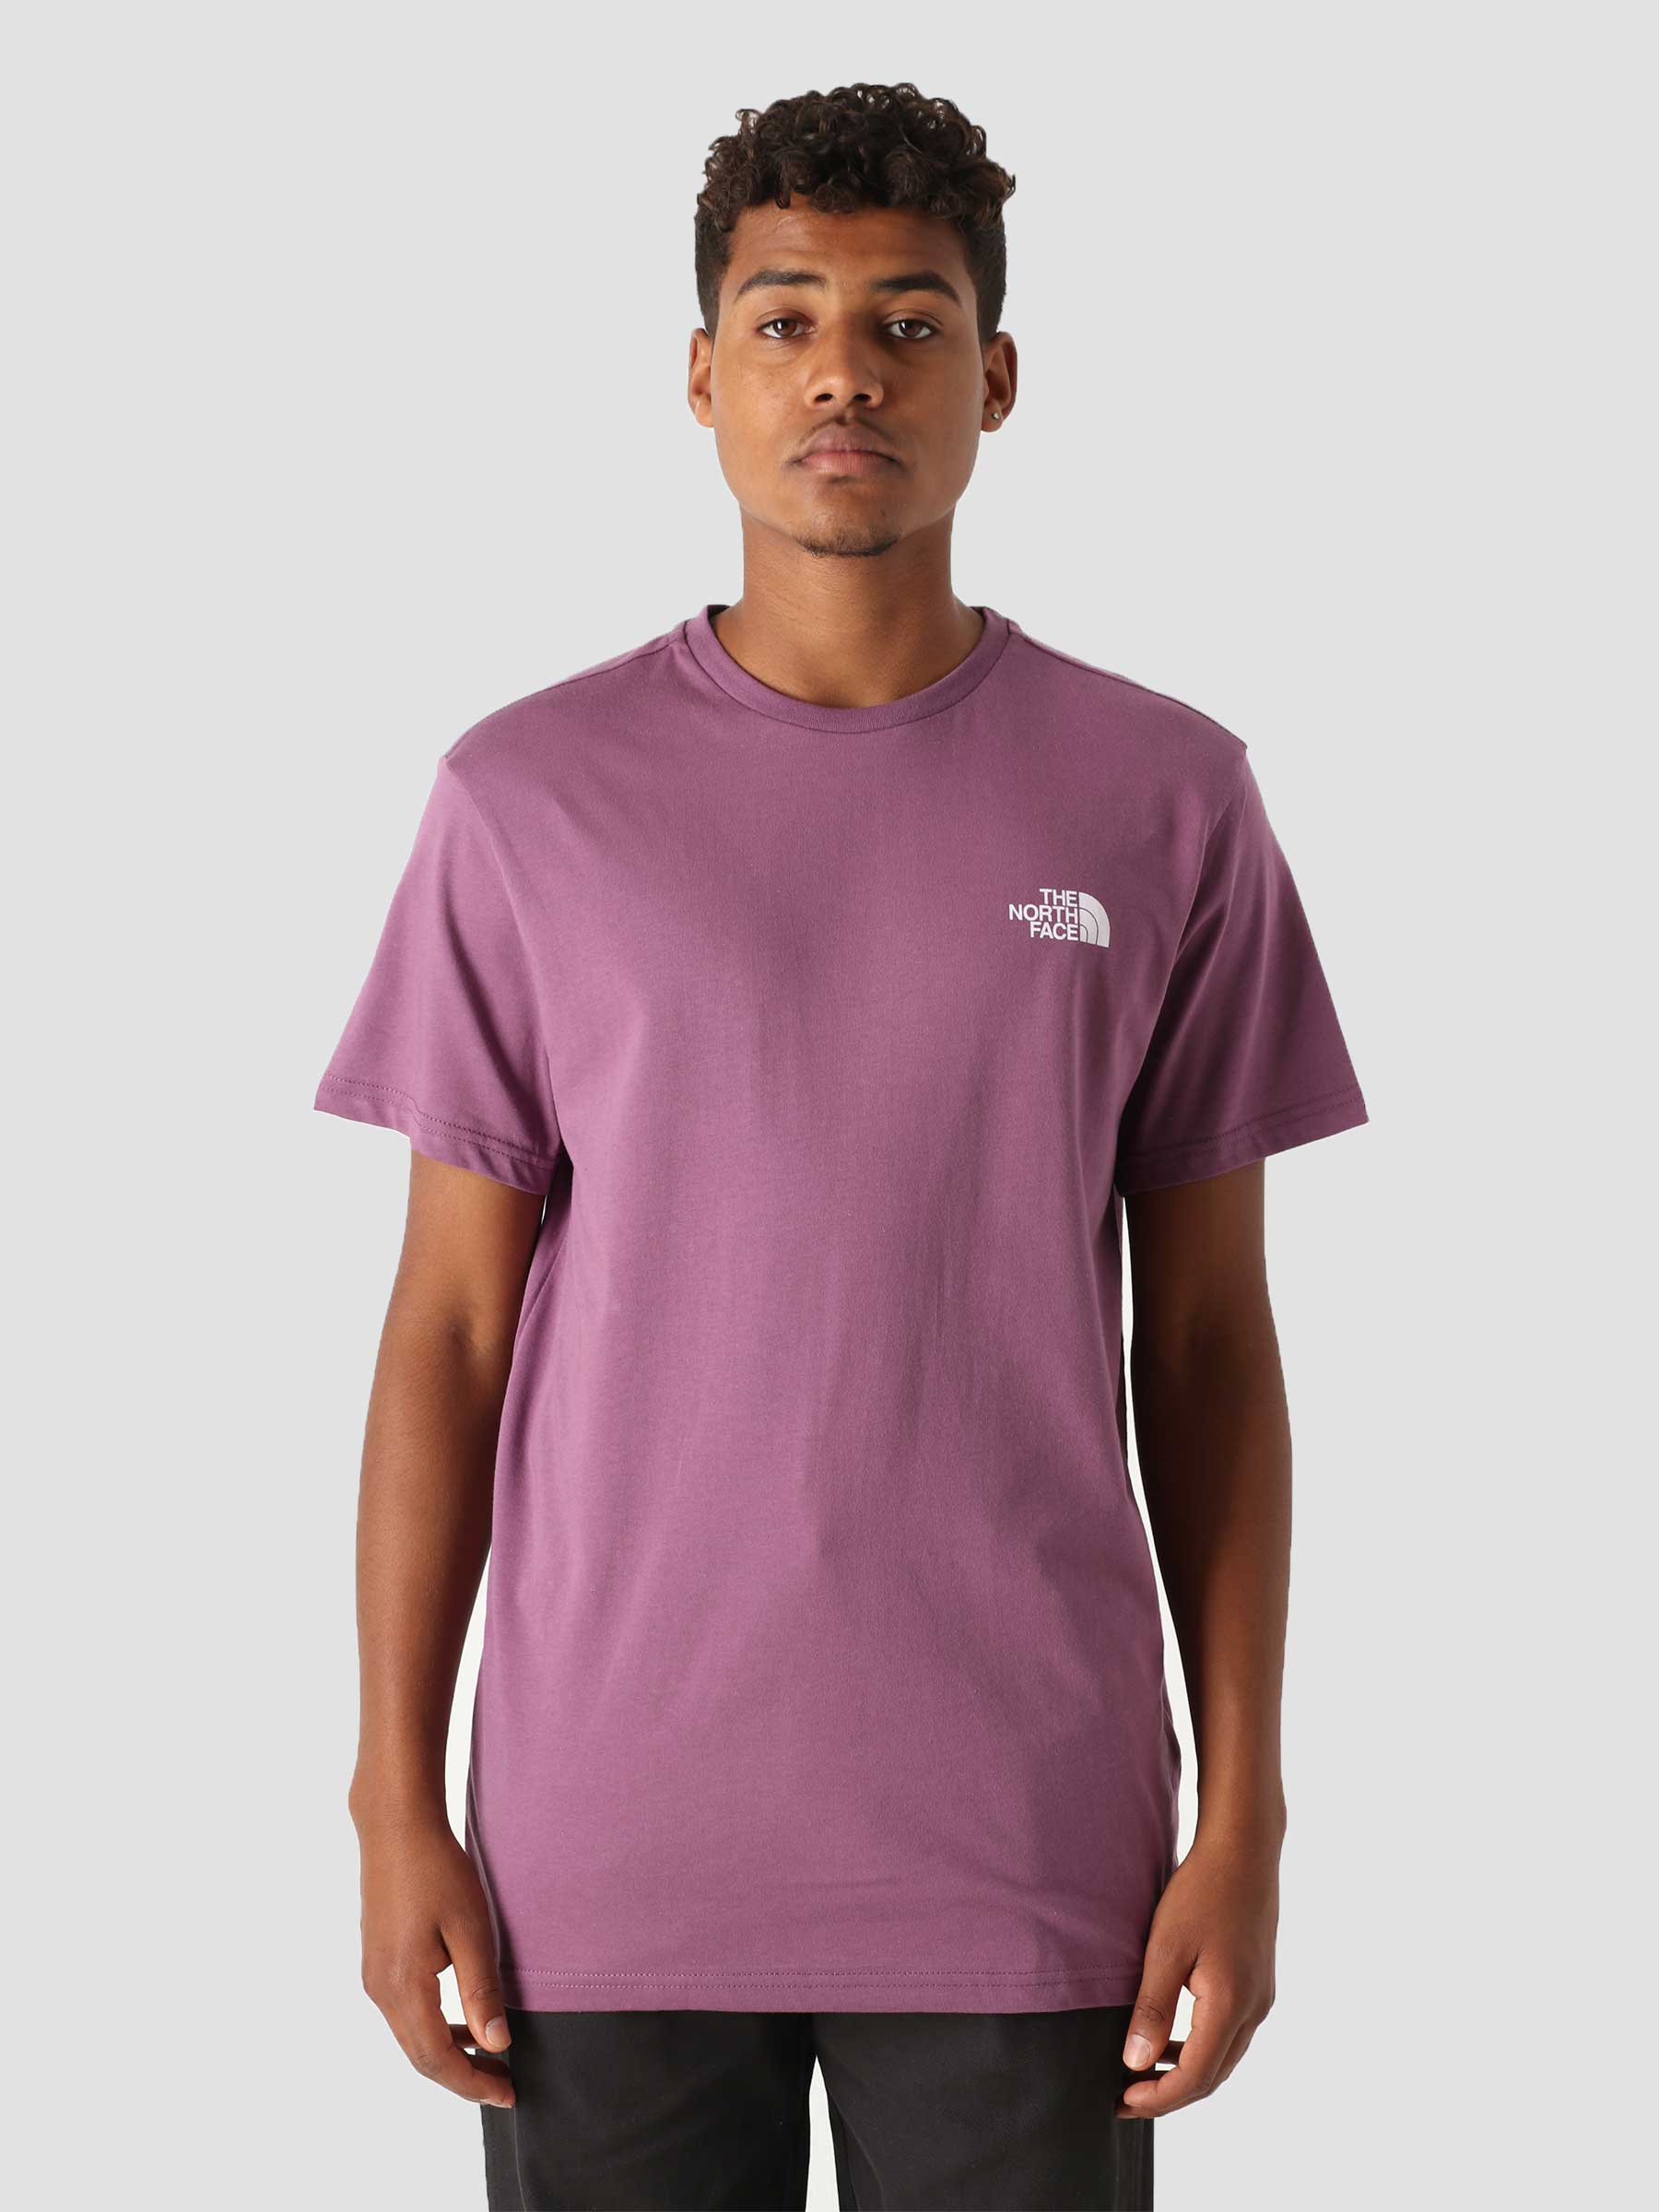 The Face North Simple T-Shirt Purple - Pikes Freshcotton Dome